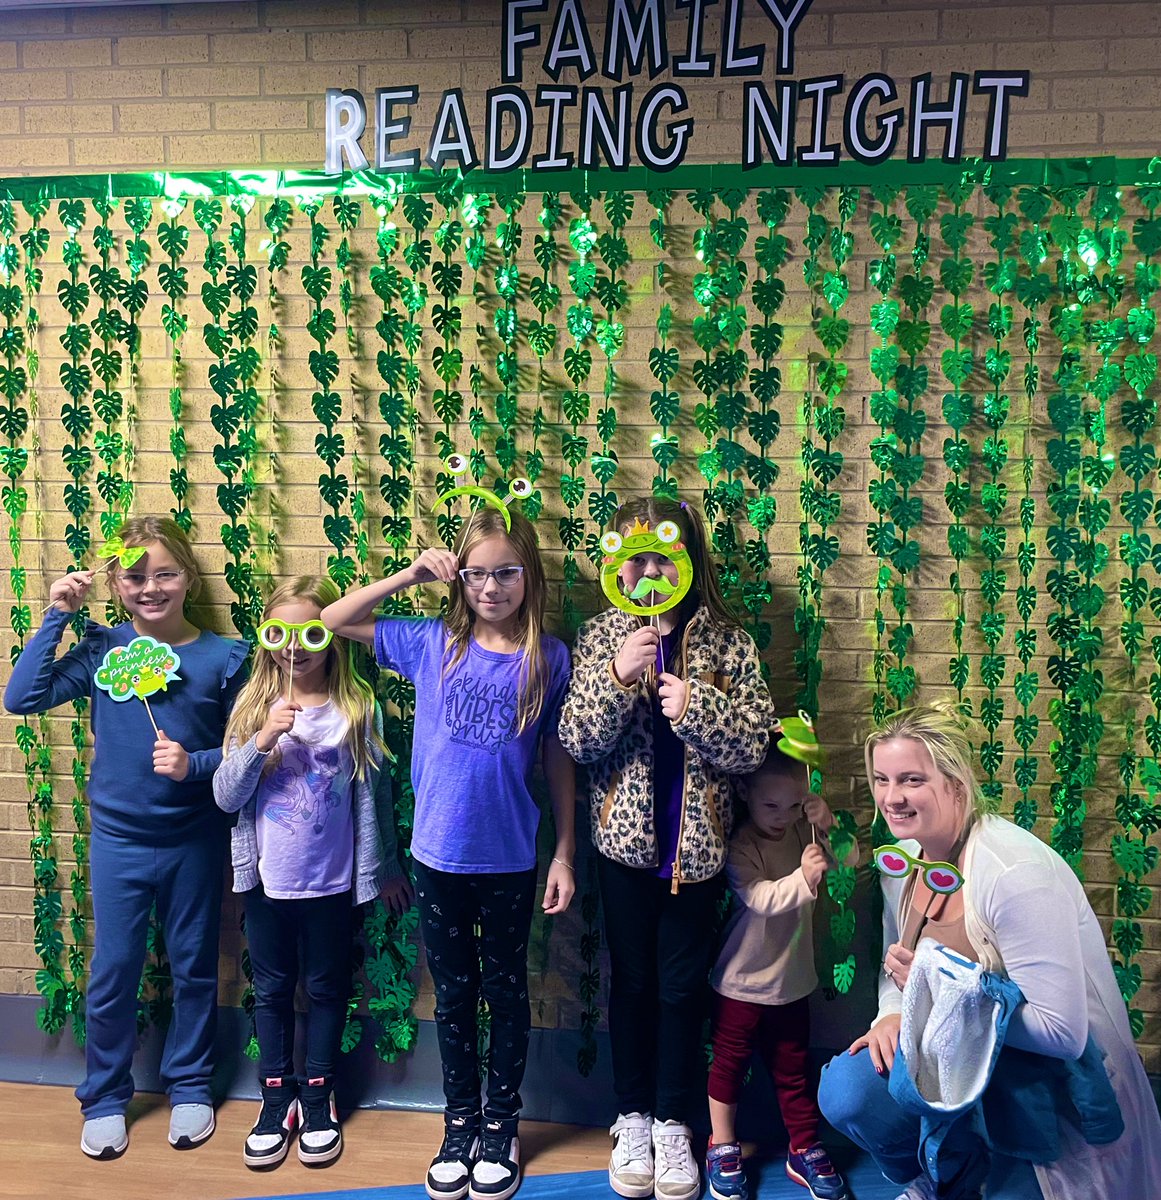 Some Family Reading Night fun! What a great night! Thank you to everyone who came out! 💚🐸 @KerkstraCougars @miss_ellement @joseph_sweeneyC #GreatHappensHere #BeAToad